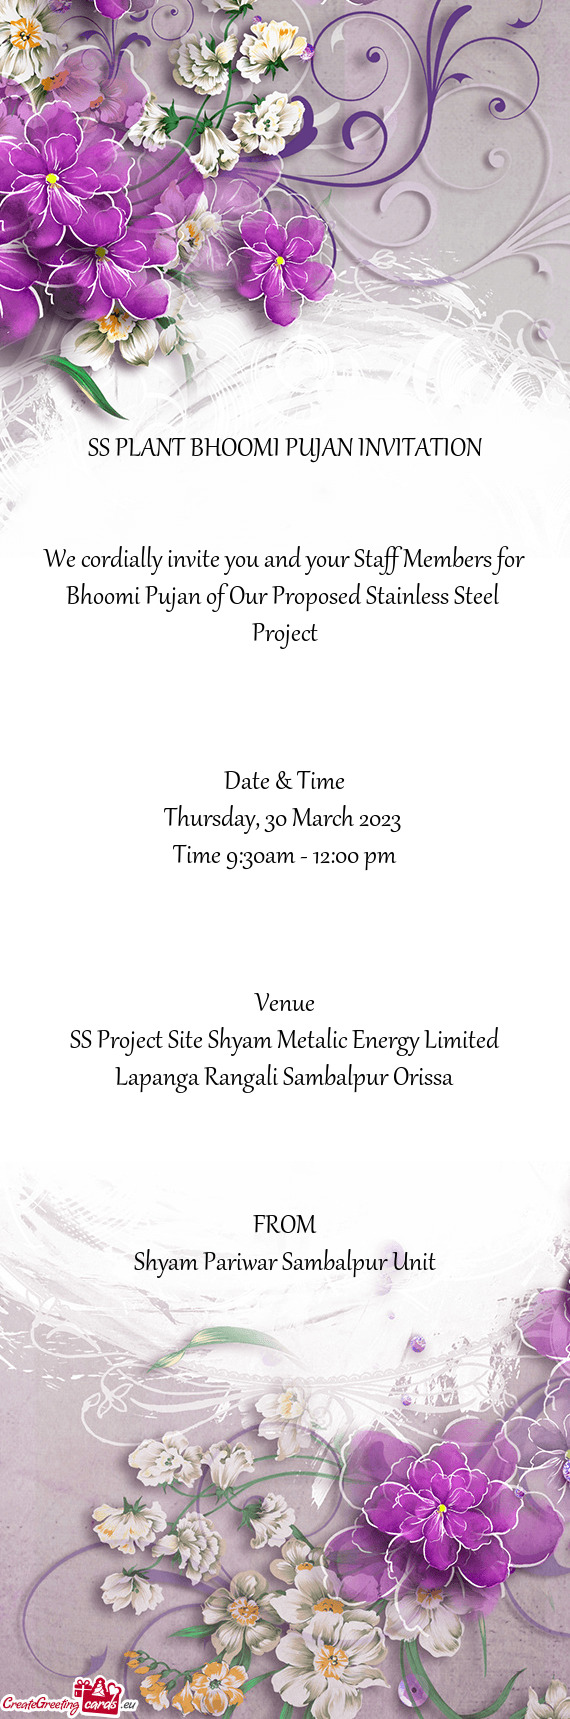 We cordially invite you and your Staff Members for Bhoomi Pujan of Our Proposed Stainless Steel Pro